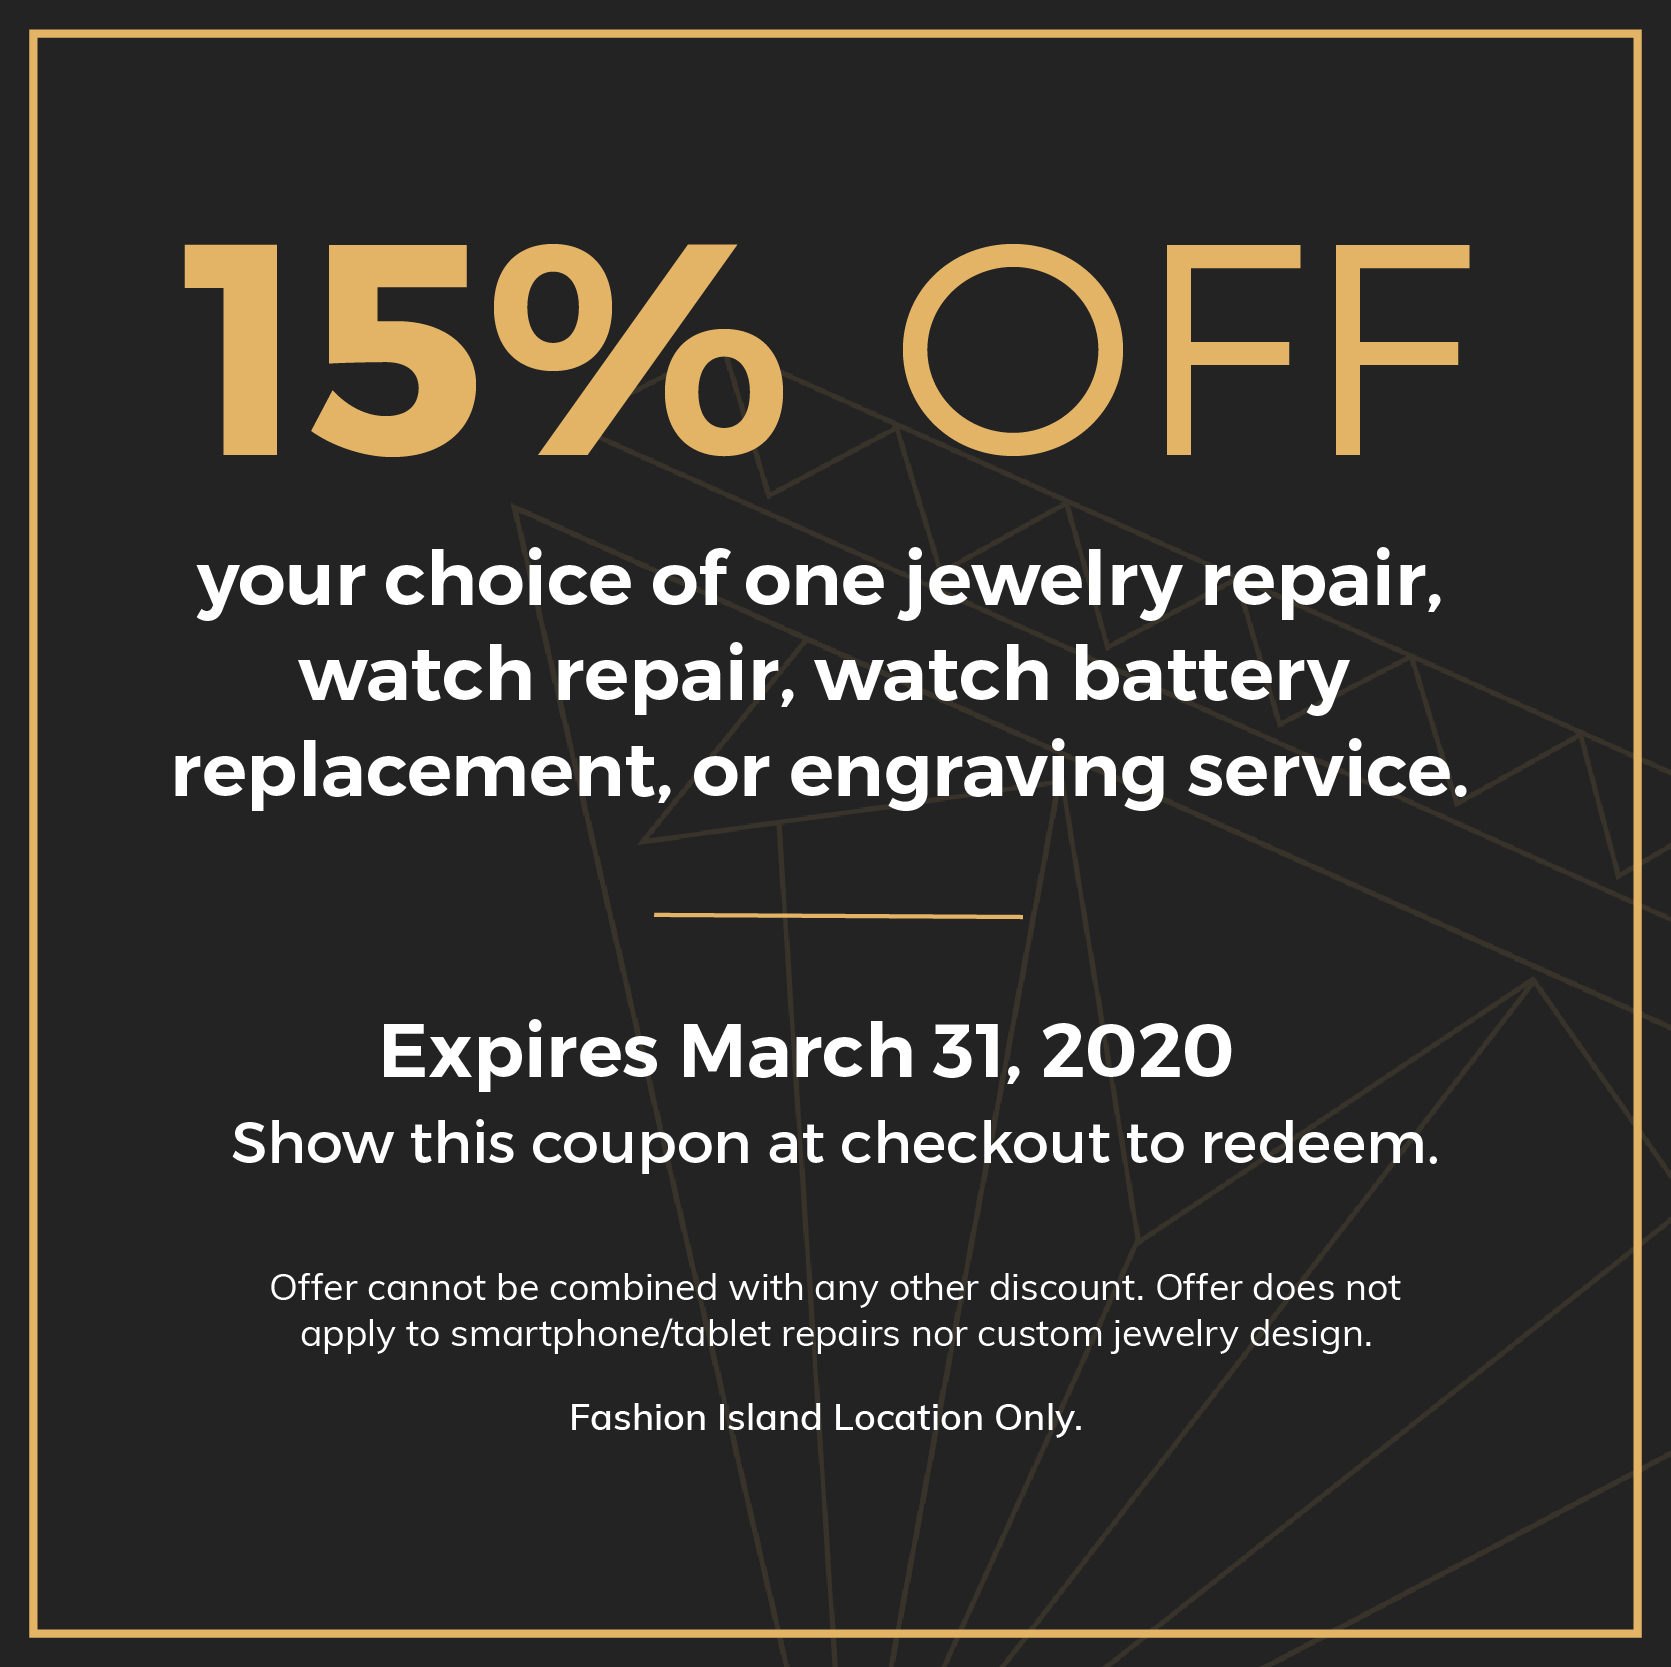 15% OFF. your choice of one jewelry repair, watch repair, watch battery replacement, or engraving service. Expires March 31, 2020. Show this coupon at checkout to redeem. Offer cannot be combined with any other discount. Offer does not apply to smartphone/tablet repairs nor custom jewelry design. Fashion Island Location Only.